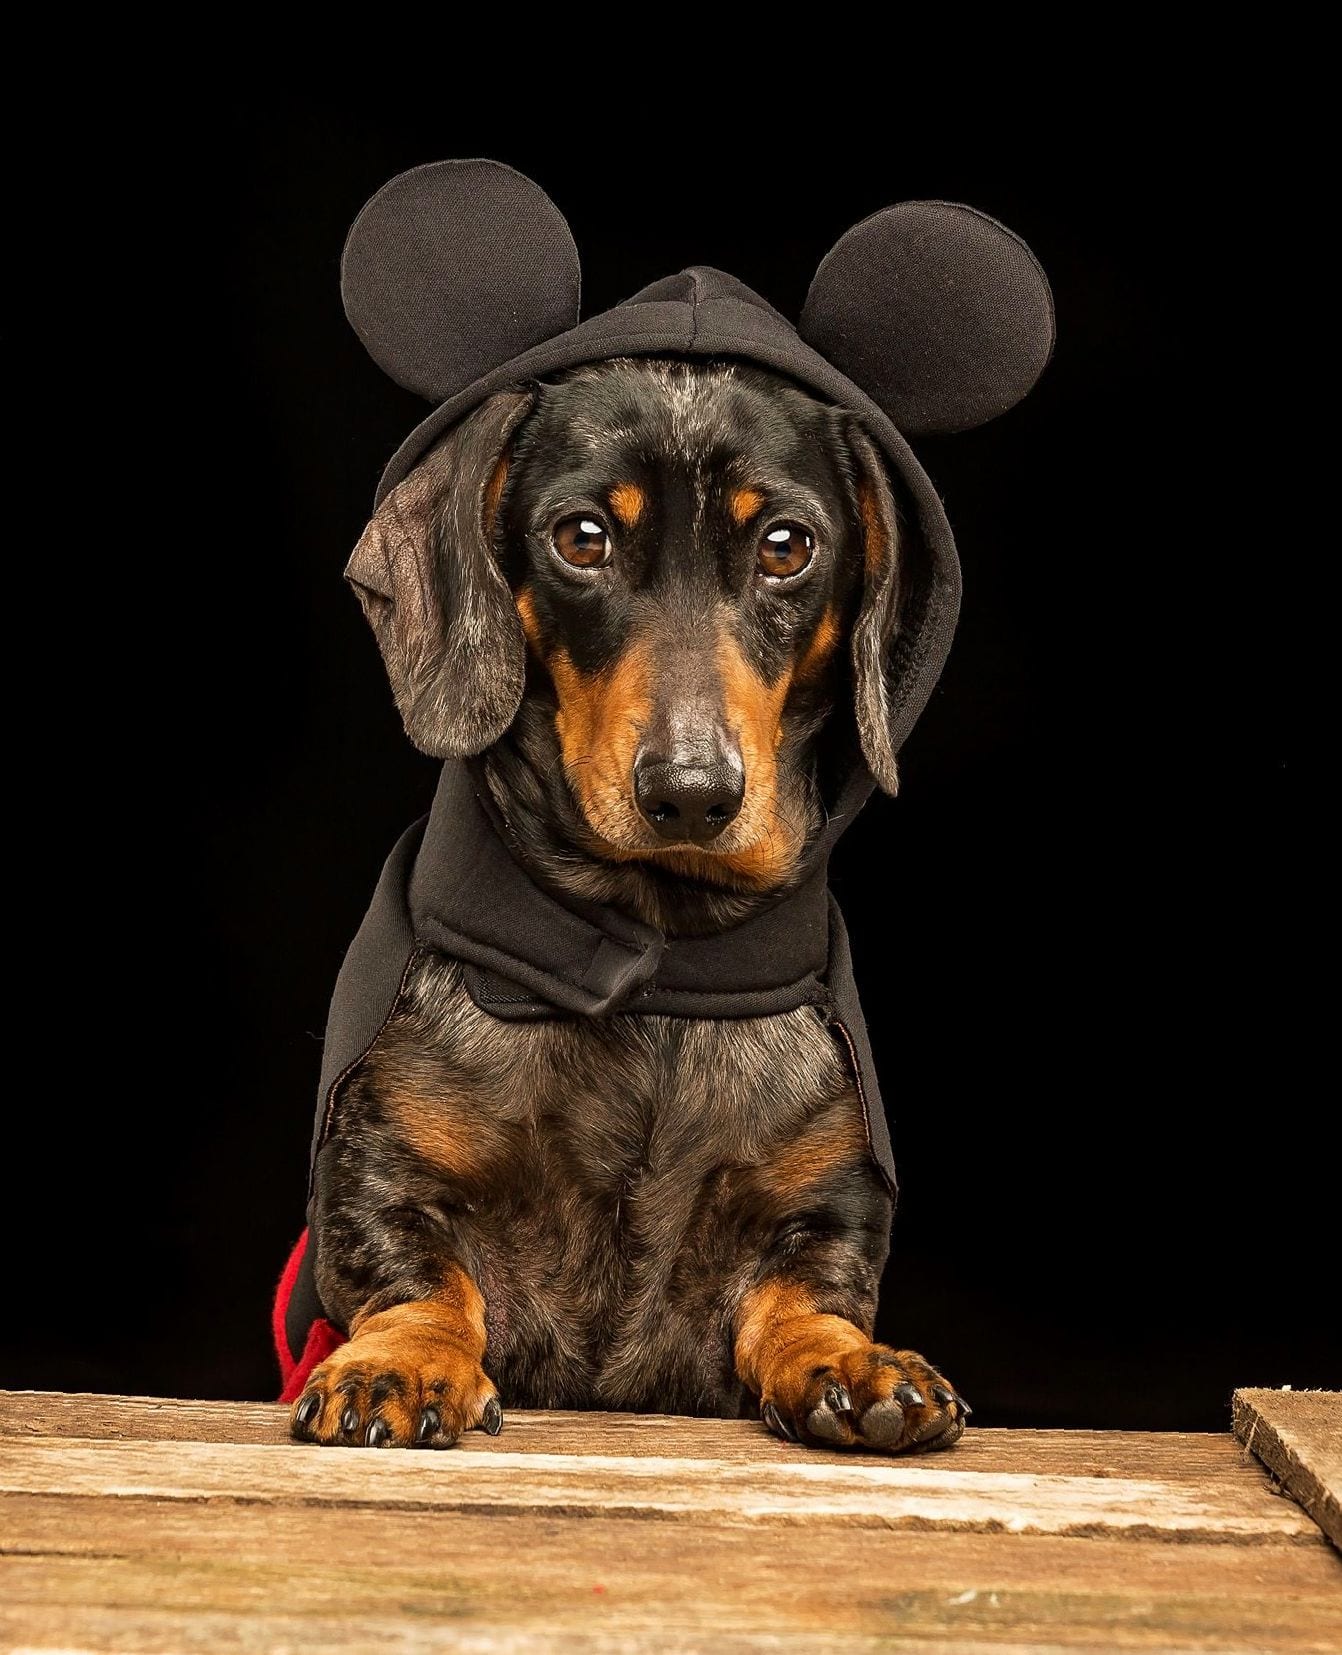 A Dachshund wearing a mickey mouse costume